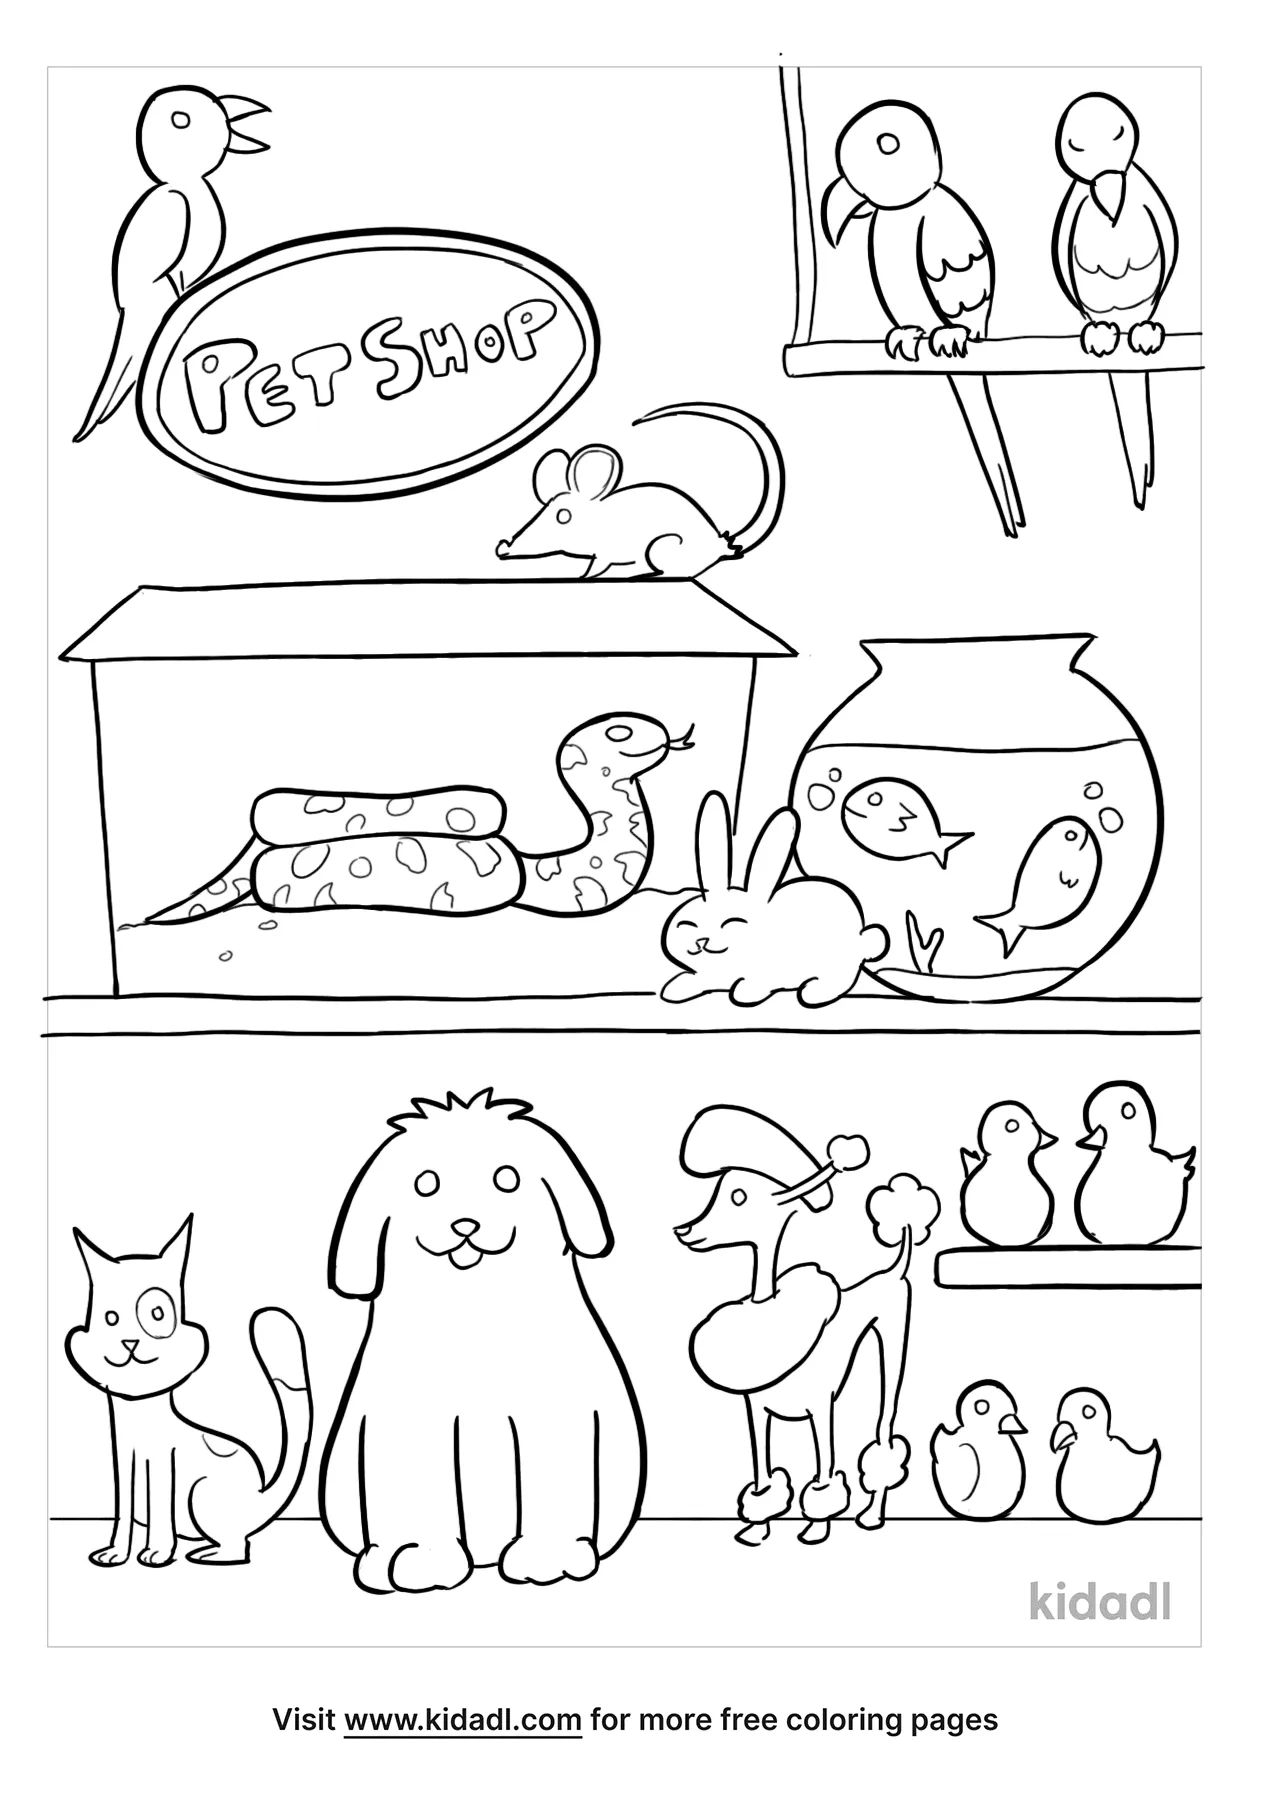 Pet Shop Coloring Pages   Free Animals Coloring Pages   Kidadl